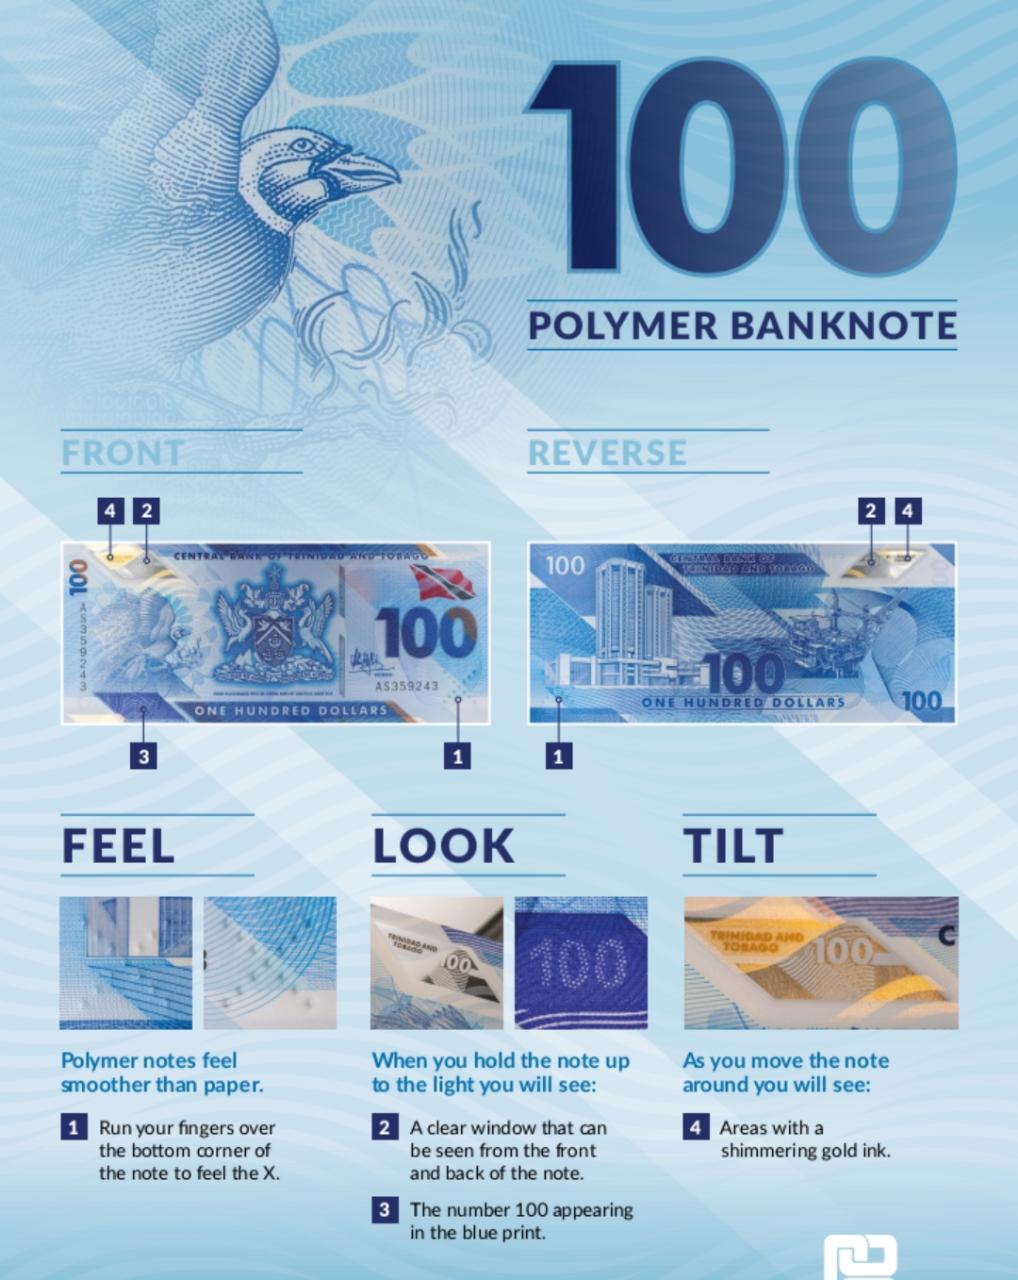 No more old $100 bills from December 30th, 2019